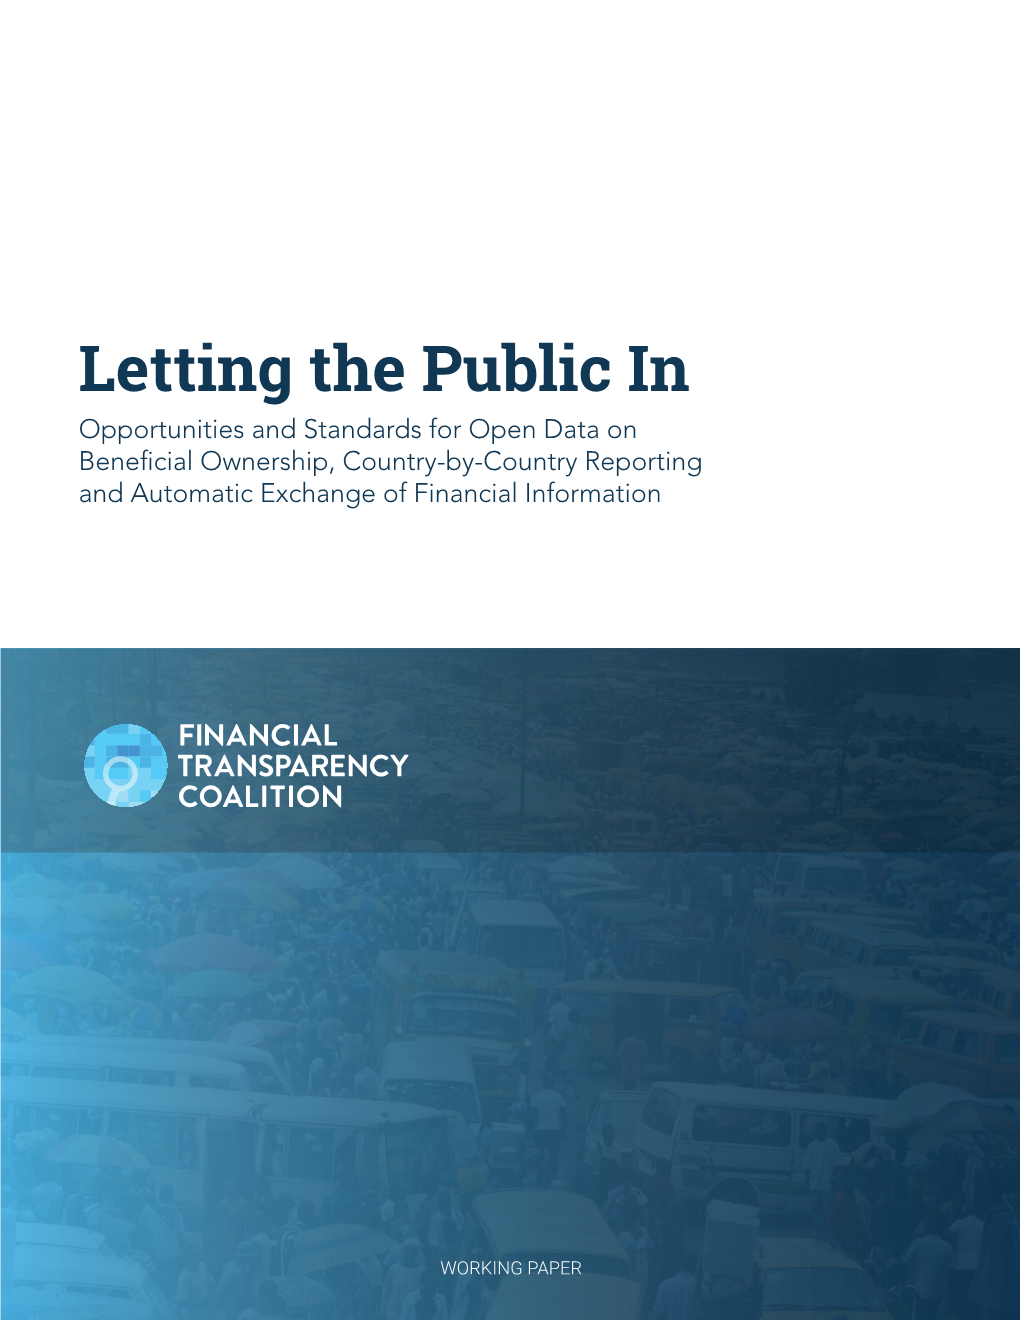 Letting the Public In: Opportunities and Standards for Open Data on Beneficial Ownership, Country-By-Country